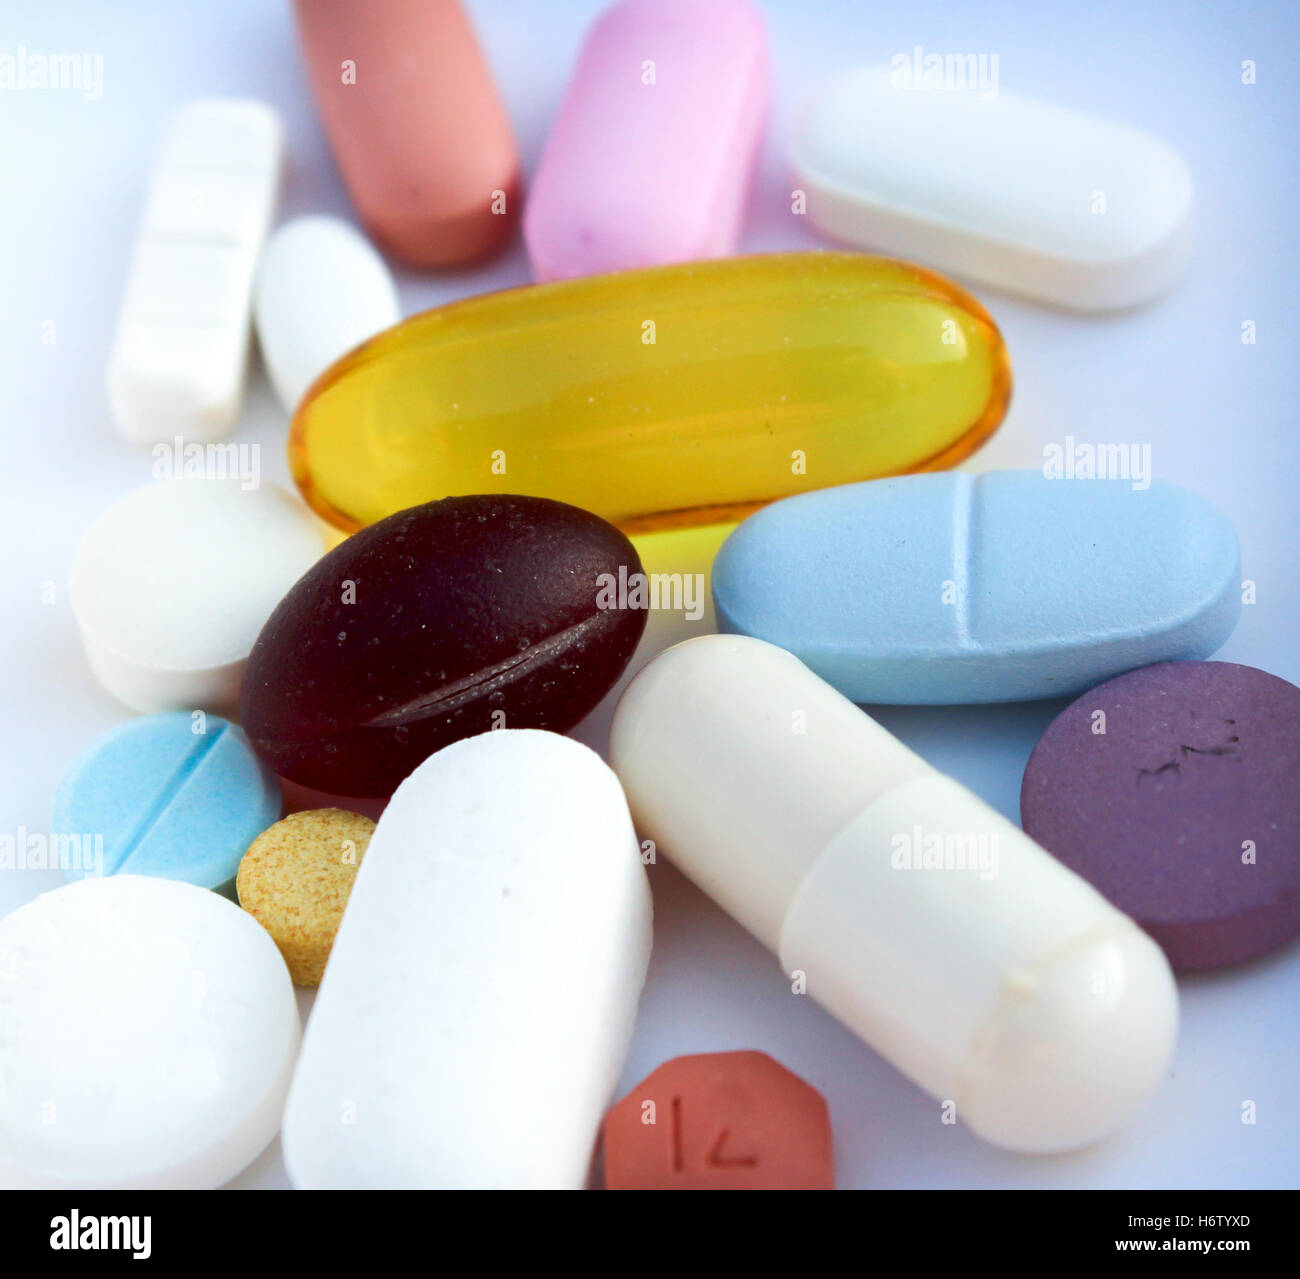 pills drugs means agent medicine drug remedy substance medicin nobody aspirin capsule pill color image group of objects Stock Photo